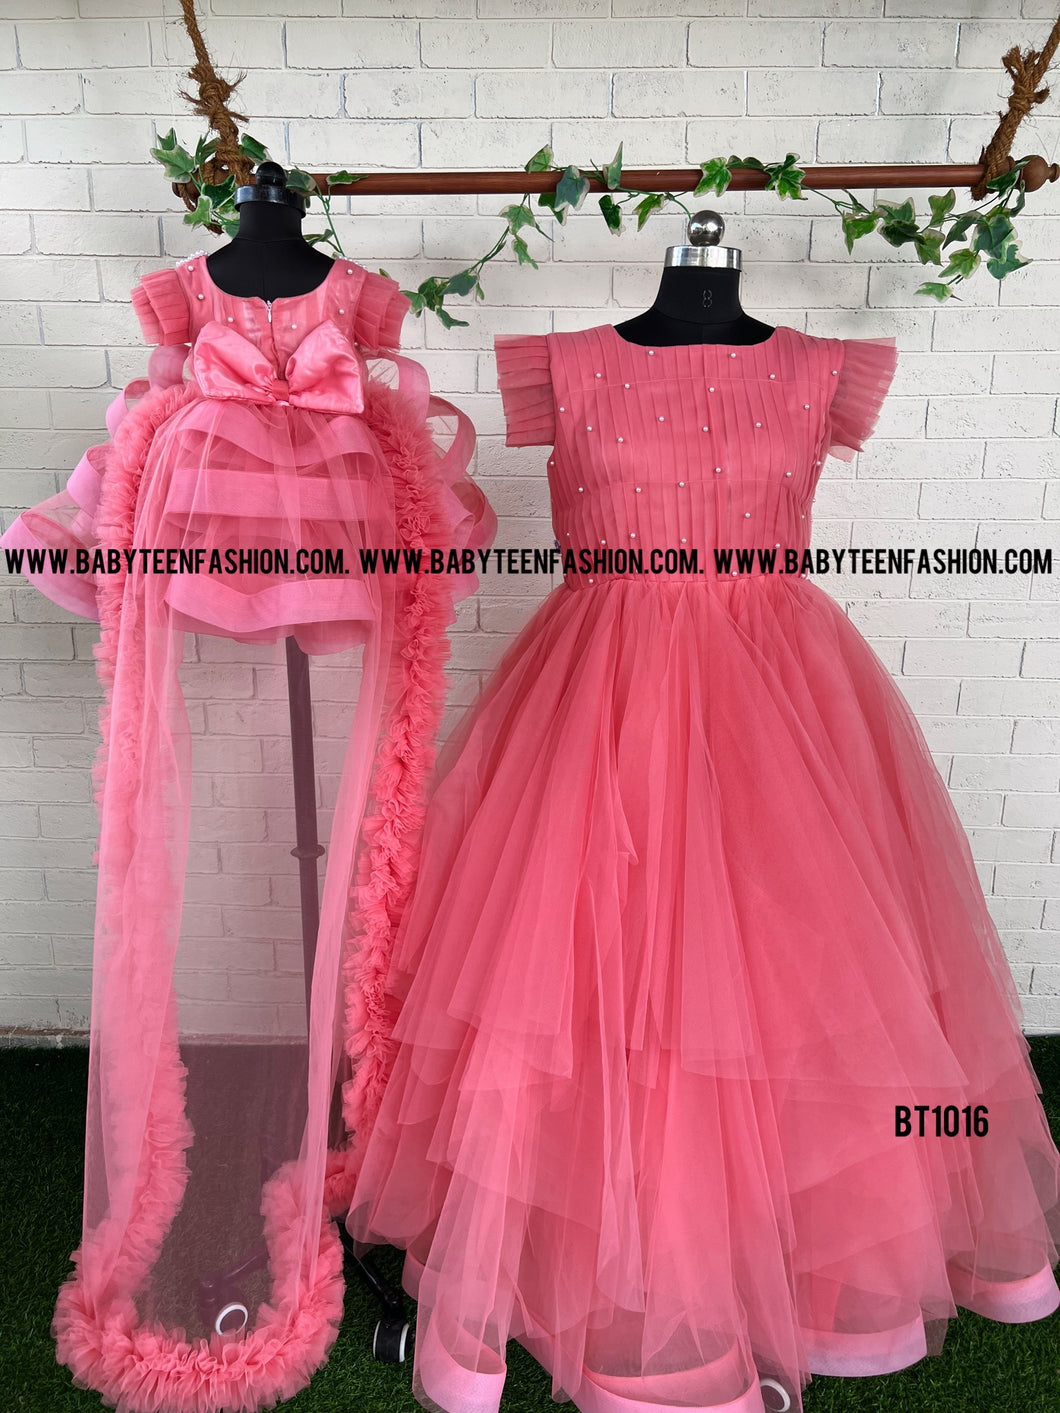 BT1016 Mom gown